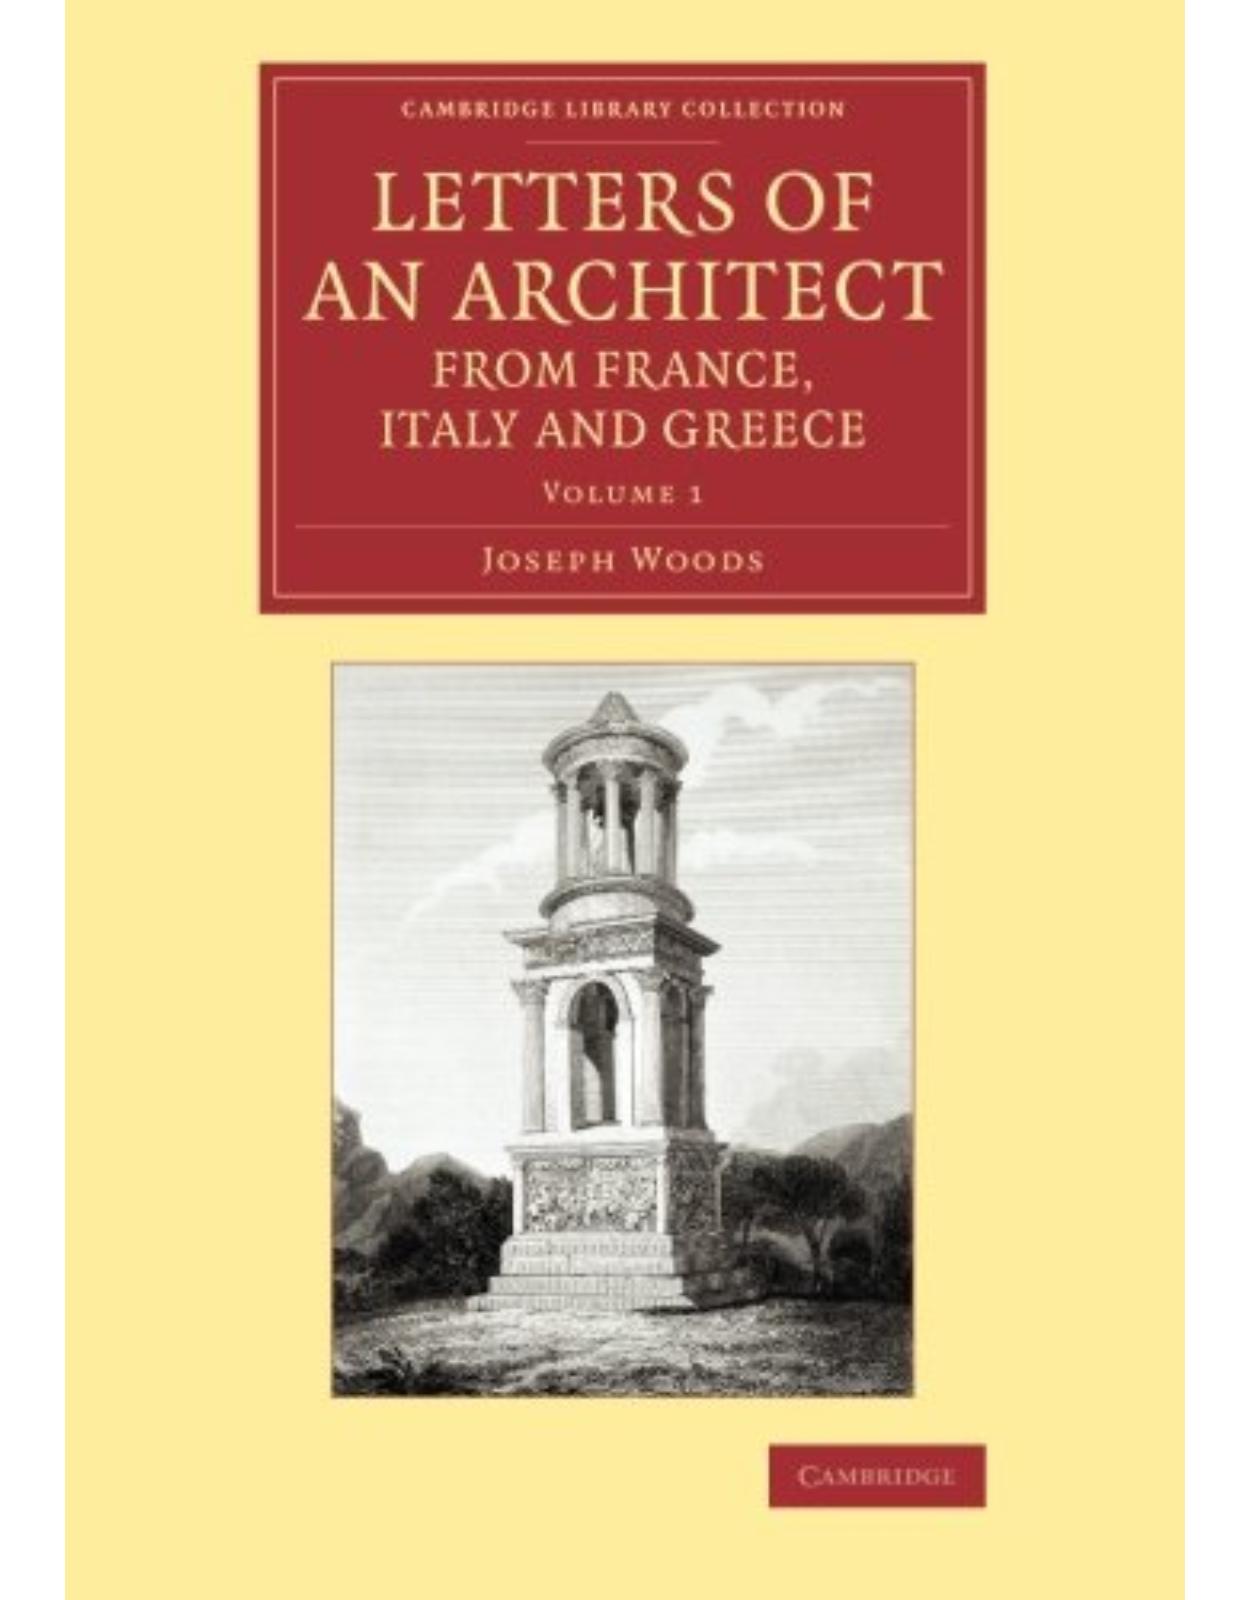 Letters of an Architect from France, Italy and Greece: Volume 1 (Cambridge Library Collection - Art and Architecture)